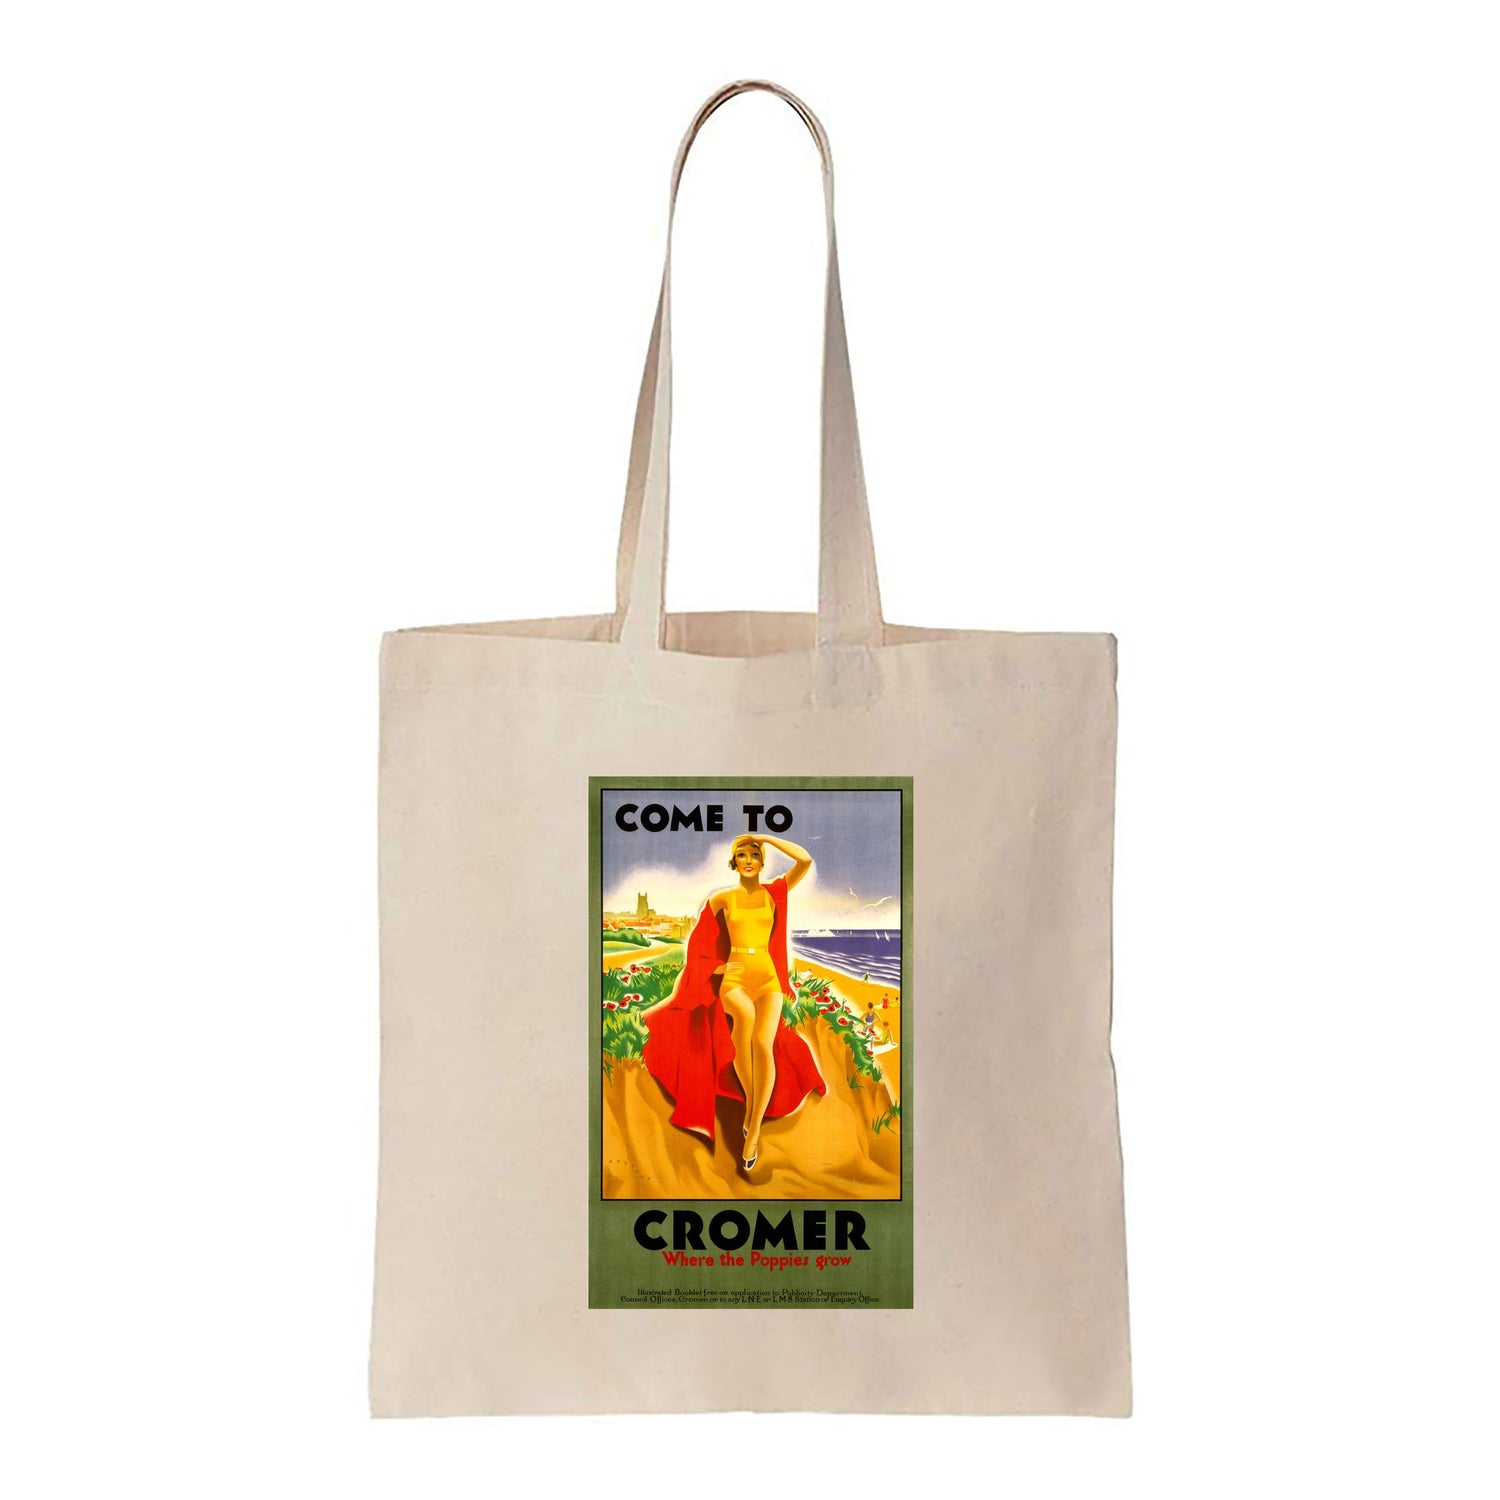 Come to Cromer Girl with Red Blanket - Canvas Tote Bag